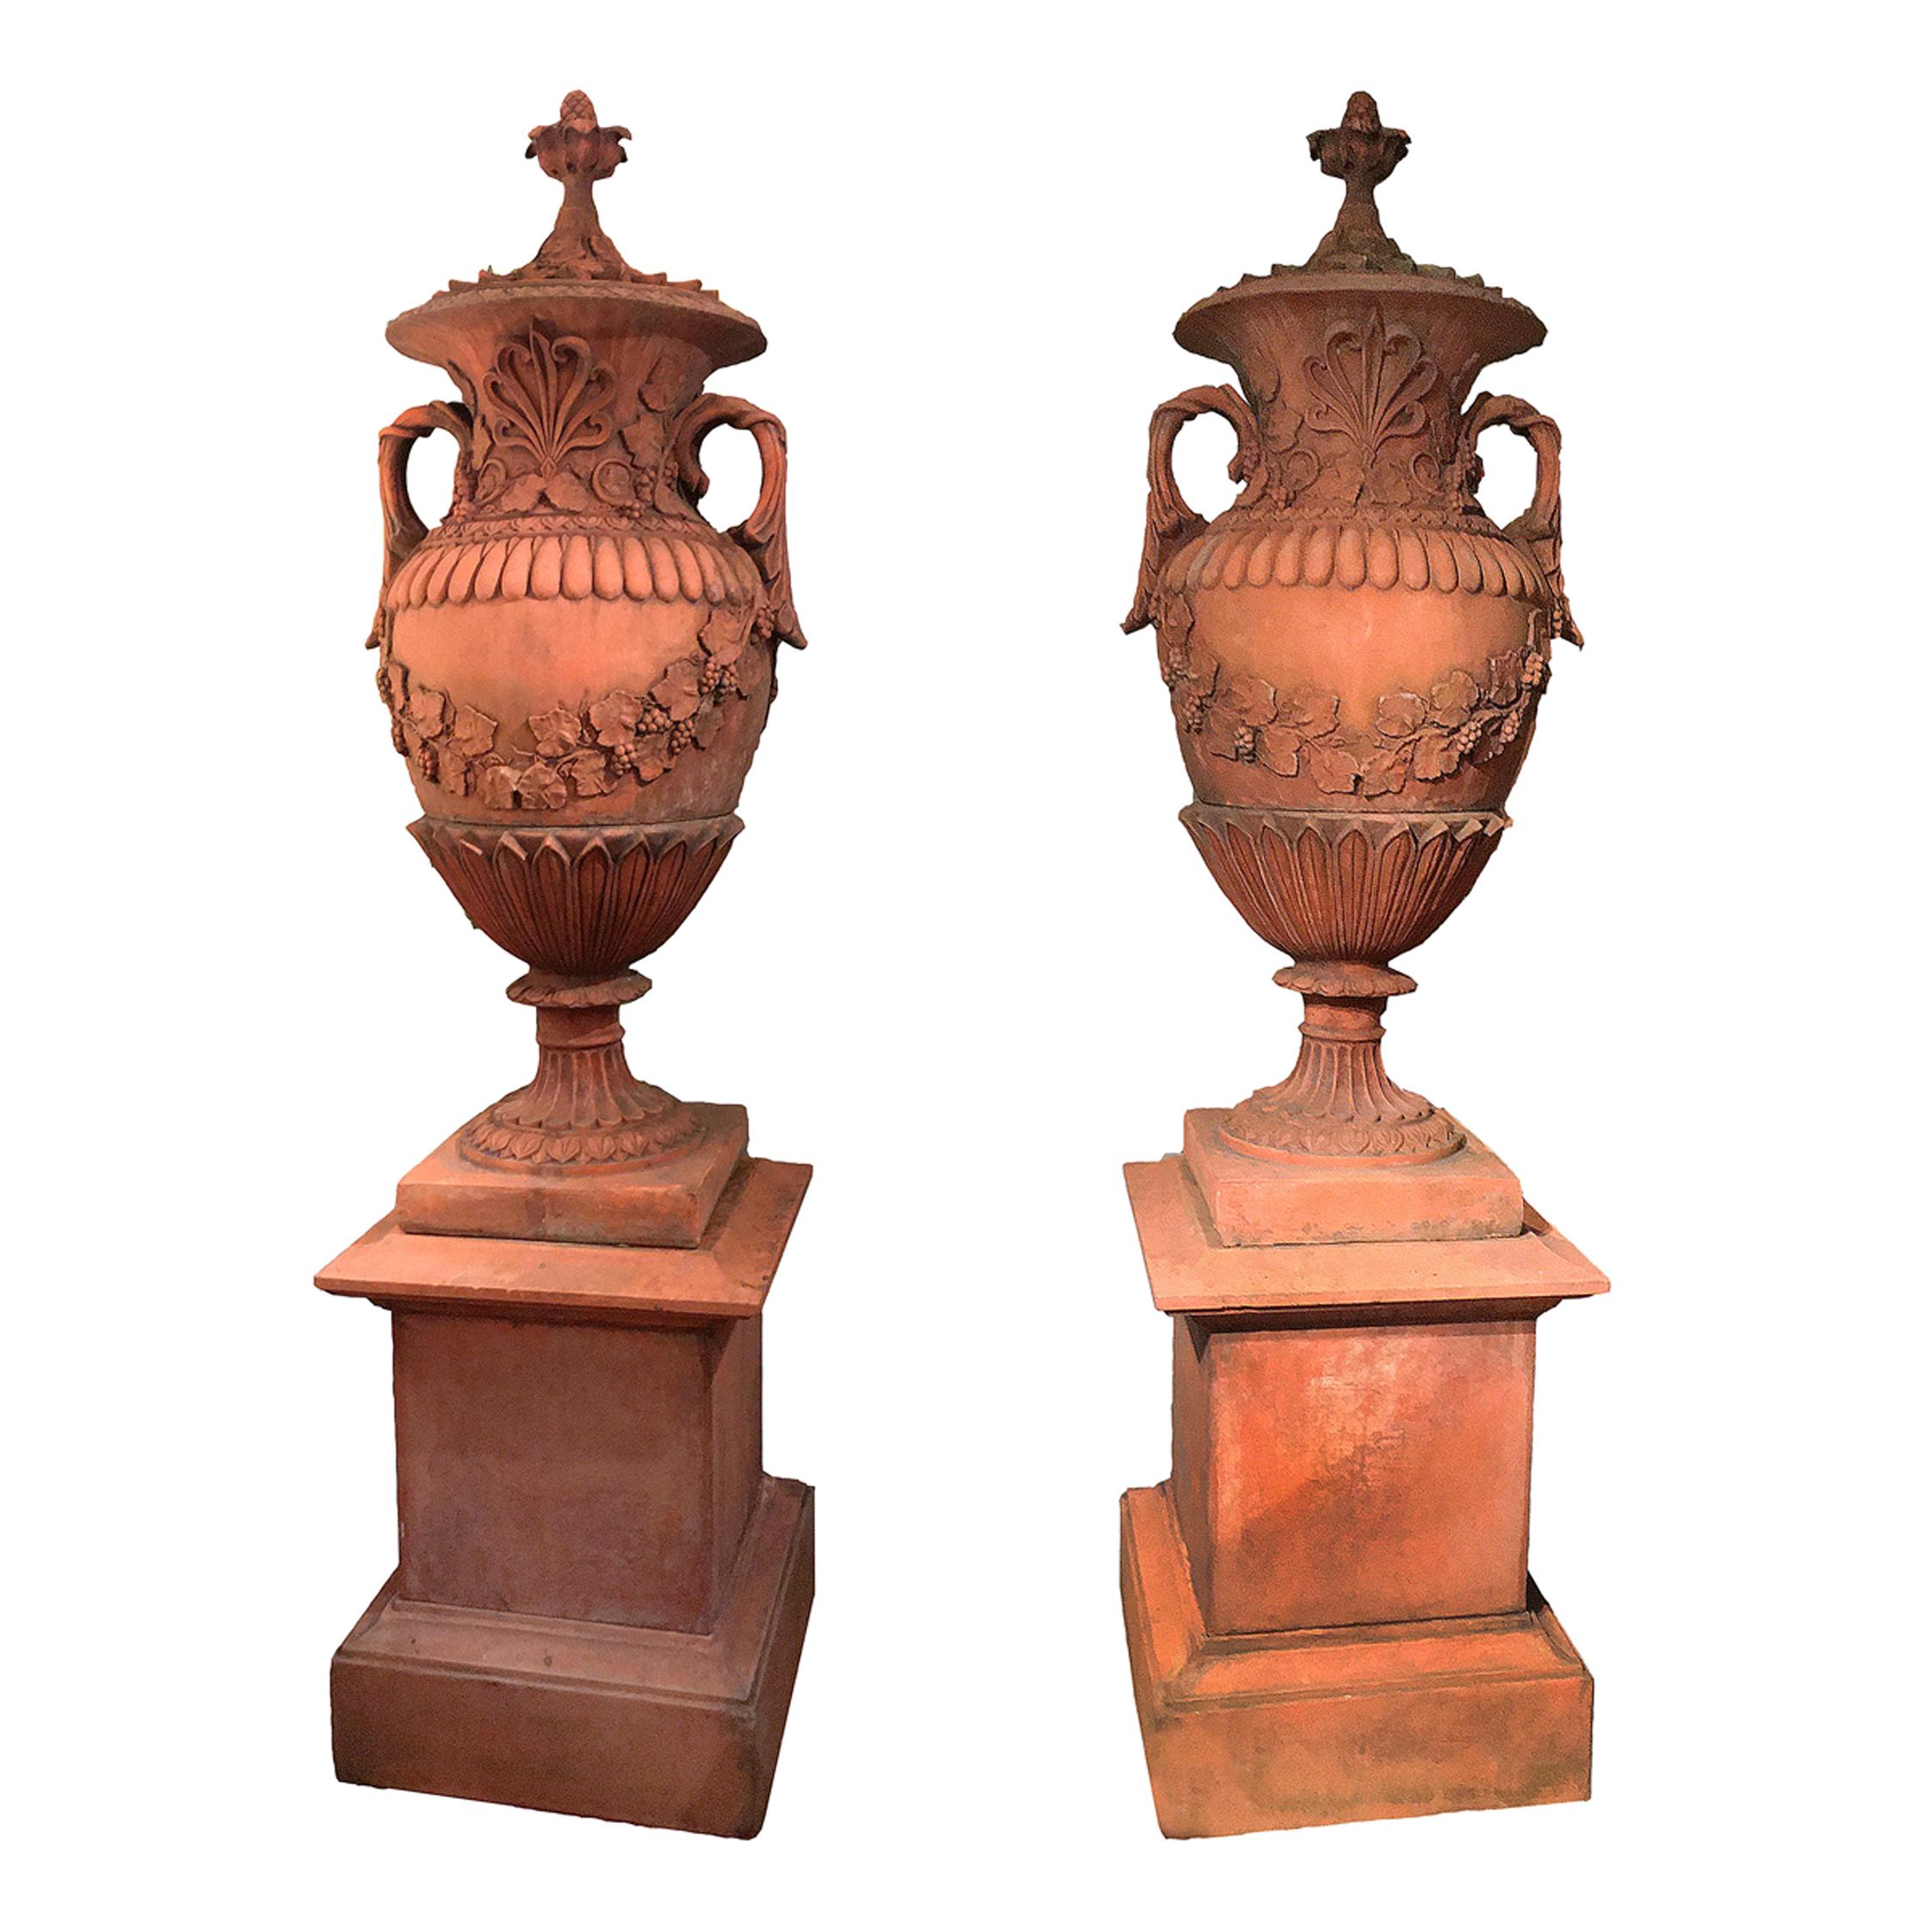 Pair of Early 19th Century Neoclassical Terracotta Urns and Lids on Plinth Bases For Sale